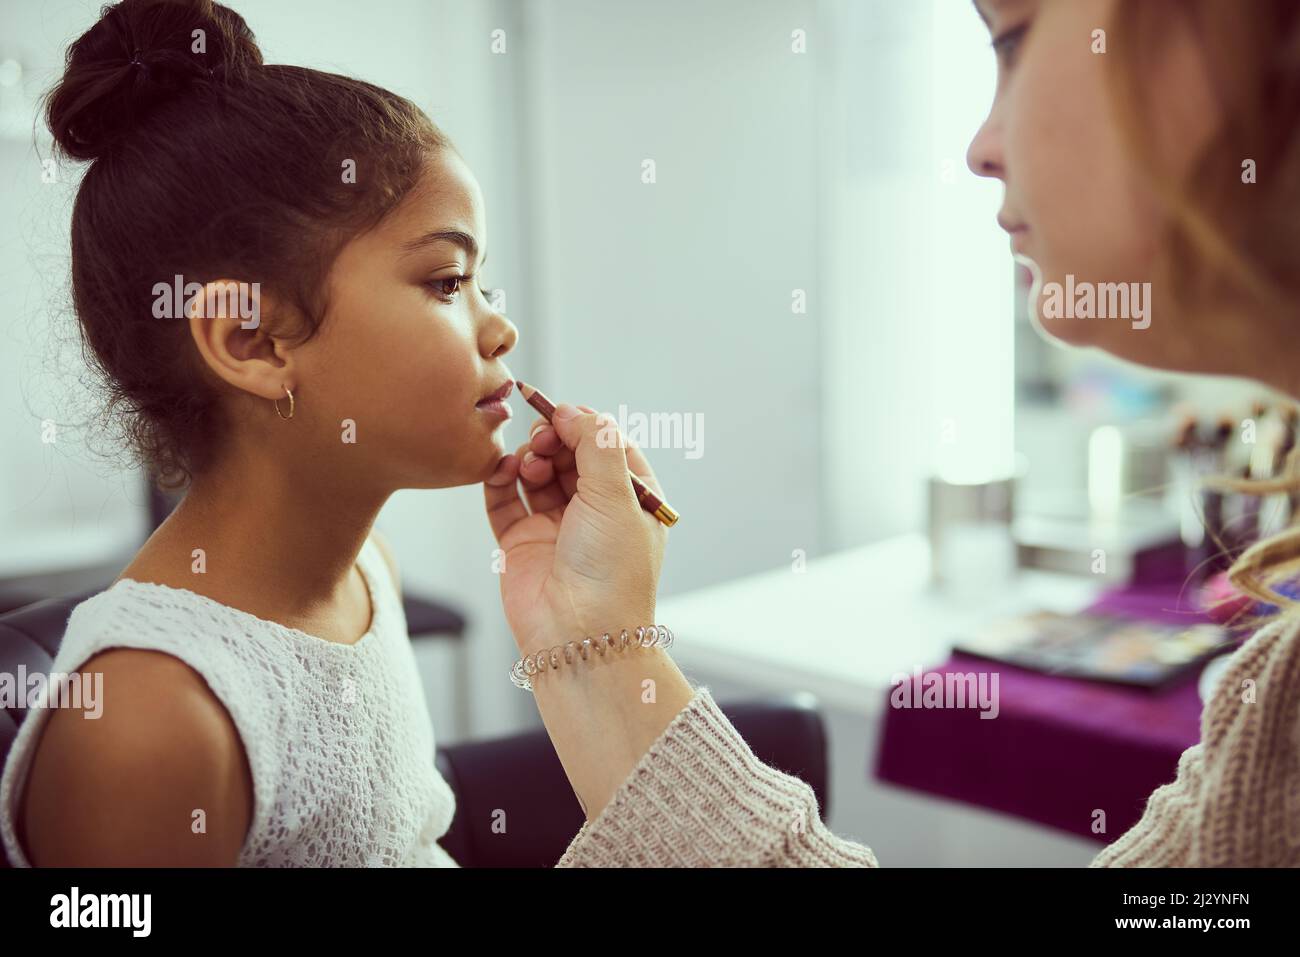 Shes a little pageant princess. Shot of a stylist applying makeup to a cute little girl in a dressing room. Stock Photo